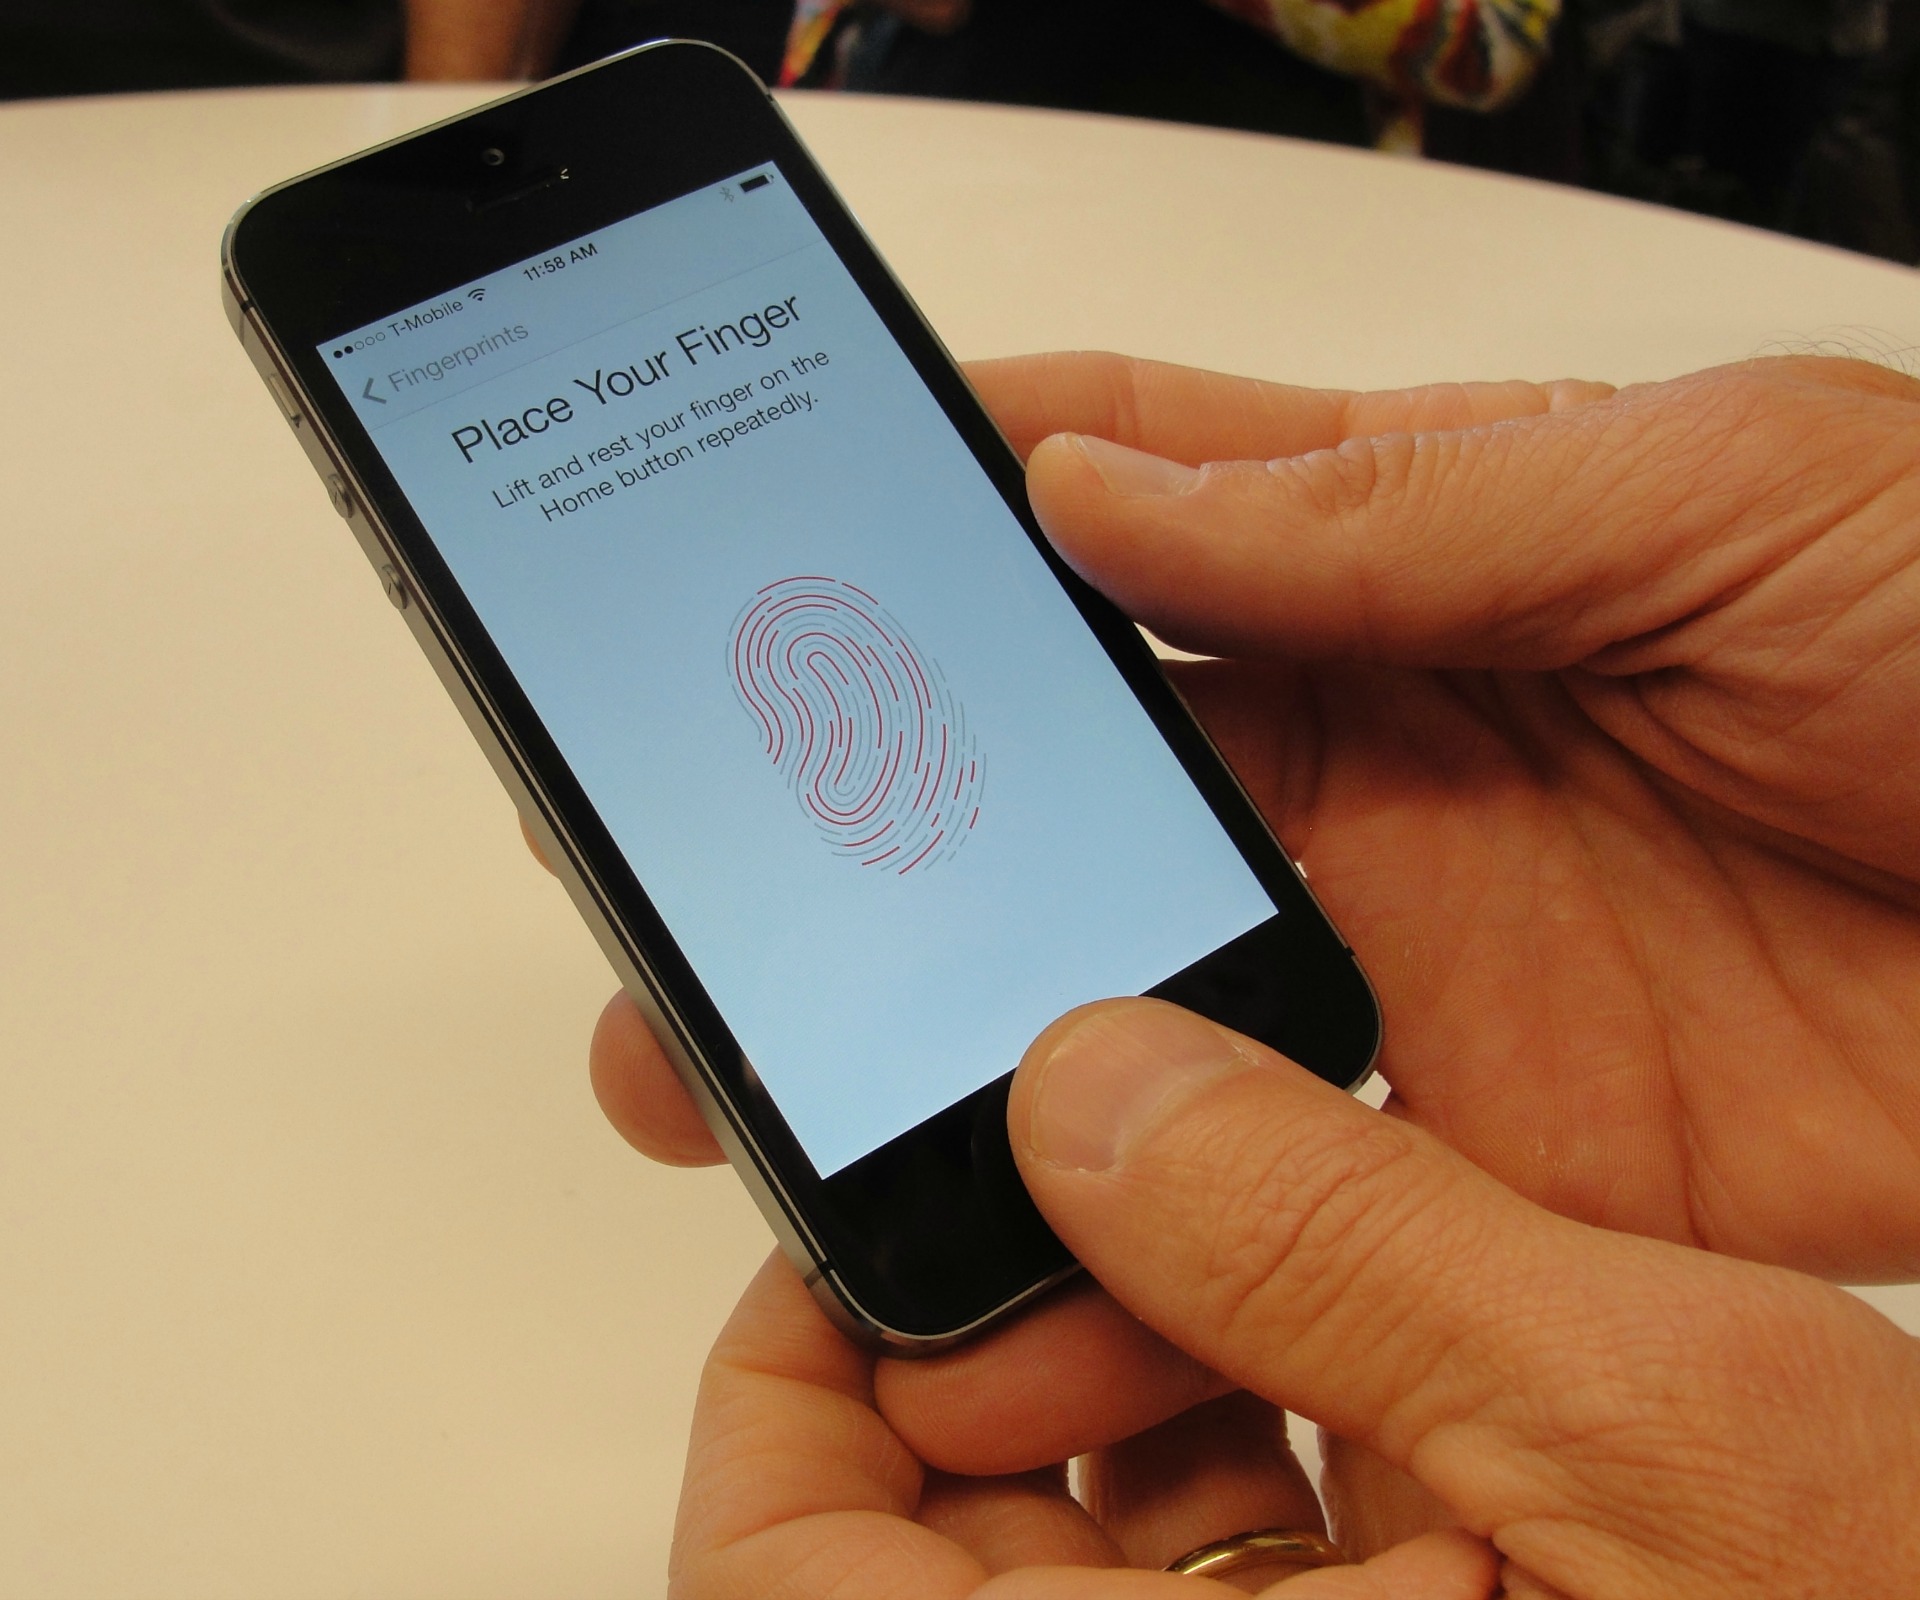 Should Apple create a secret “backdoor” for authorities to get into your iPhone?